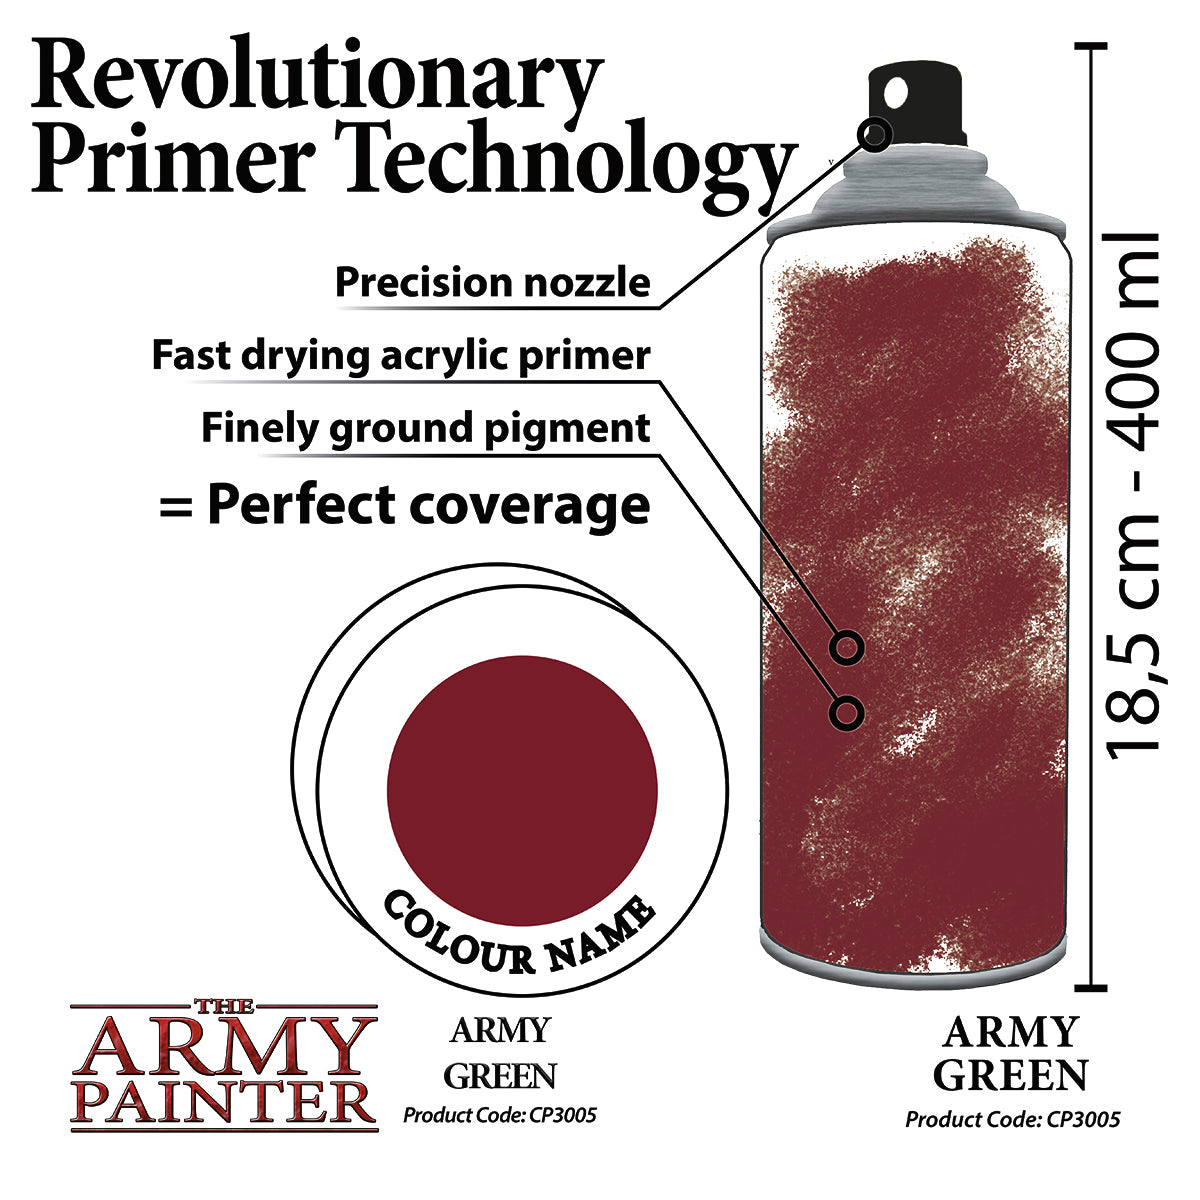 Army Painter: Army Green Spray Paint Primer